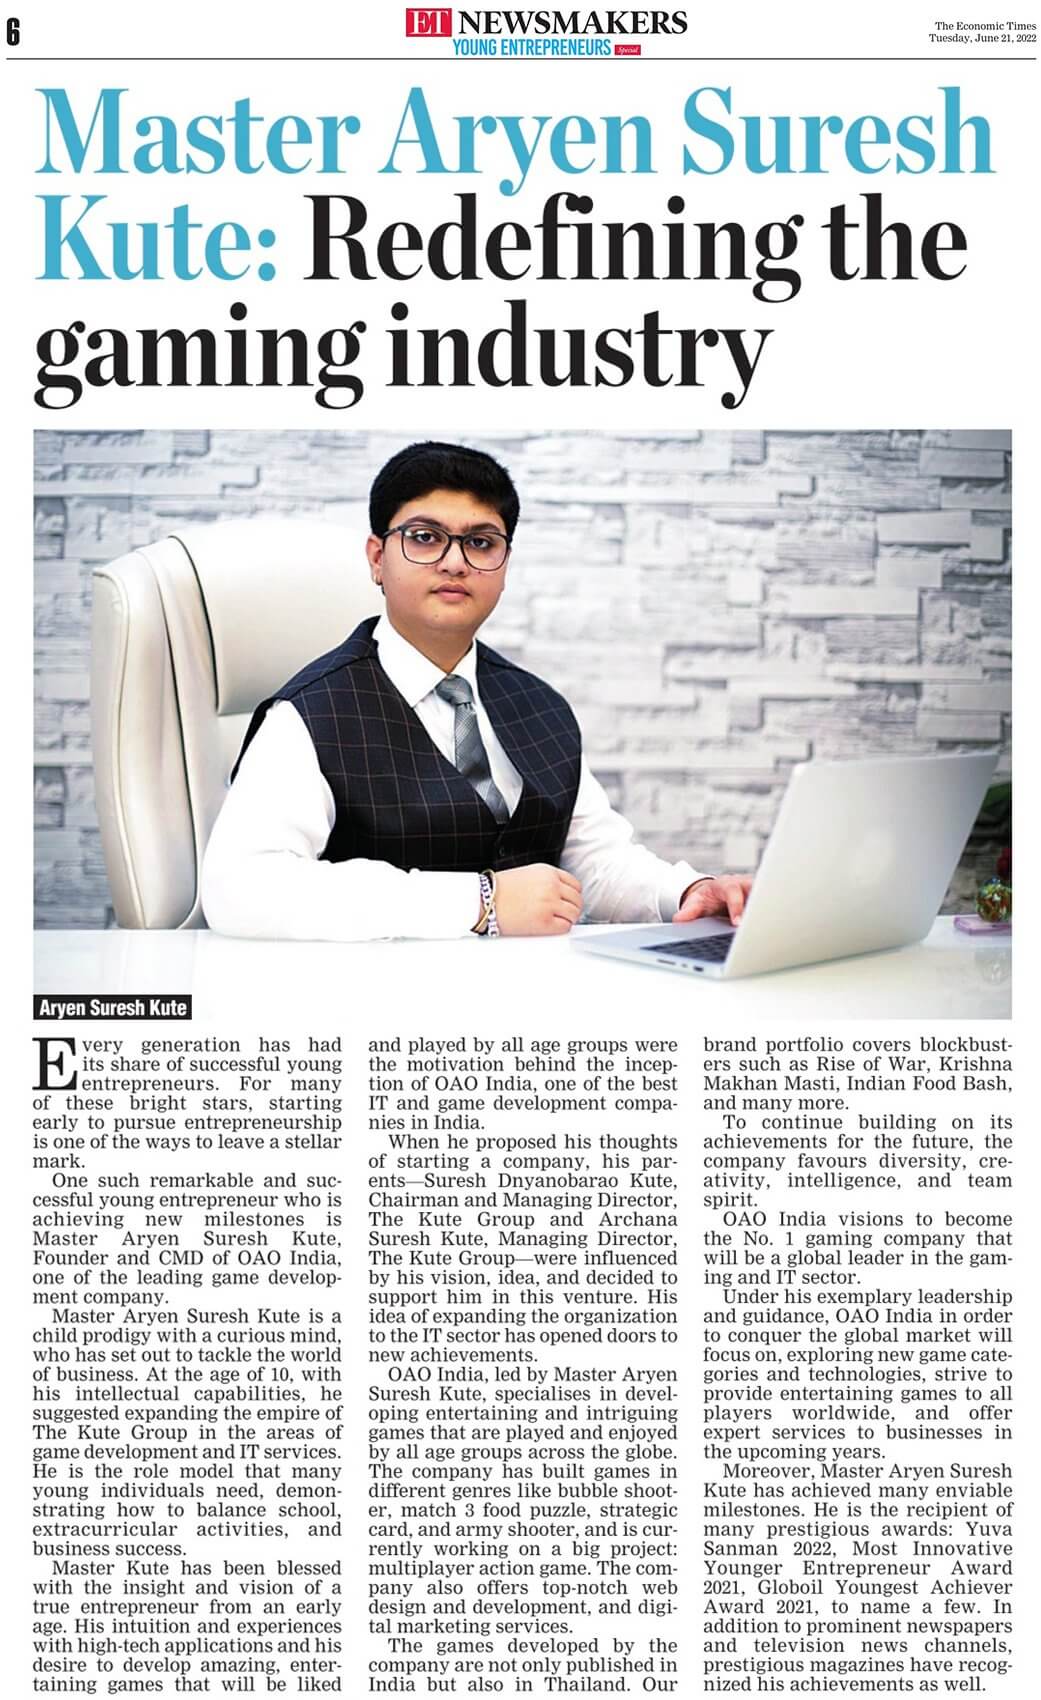 Economic Times featuring Aryen Kute - Founder & CMD - OAO INDIA